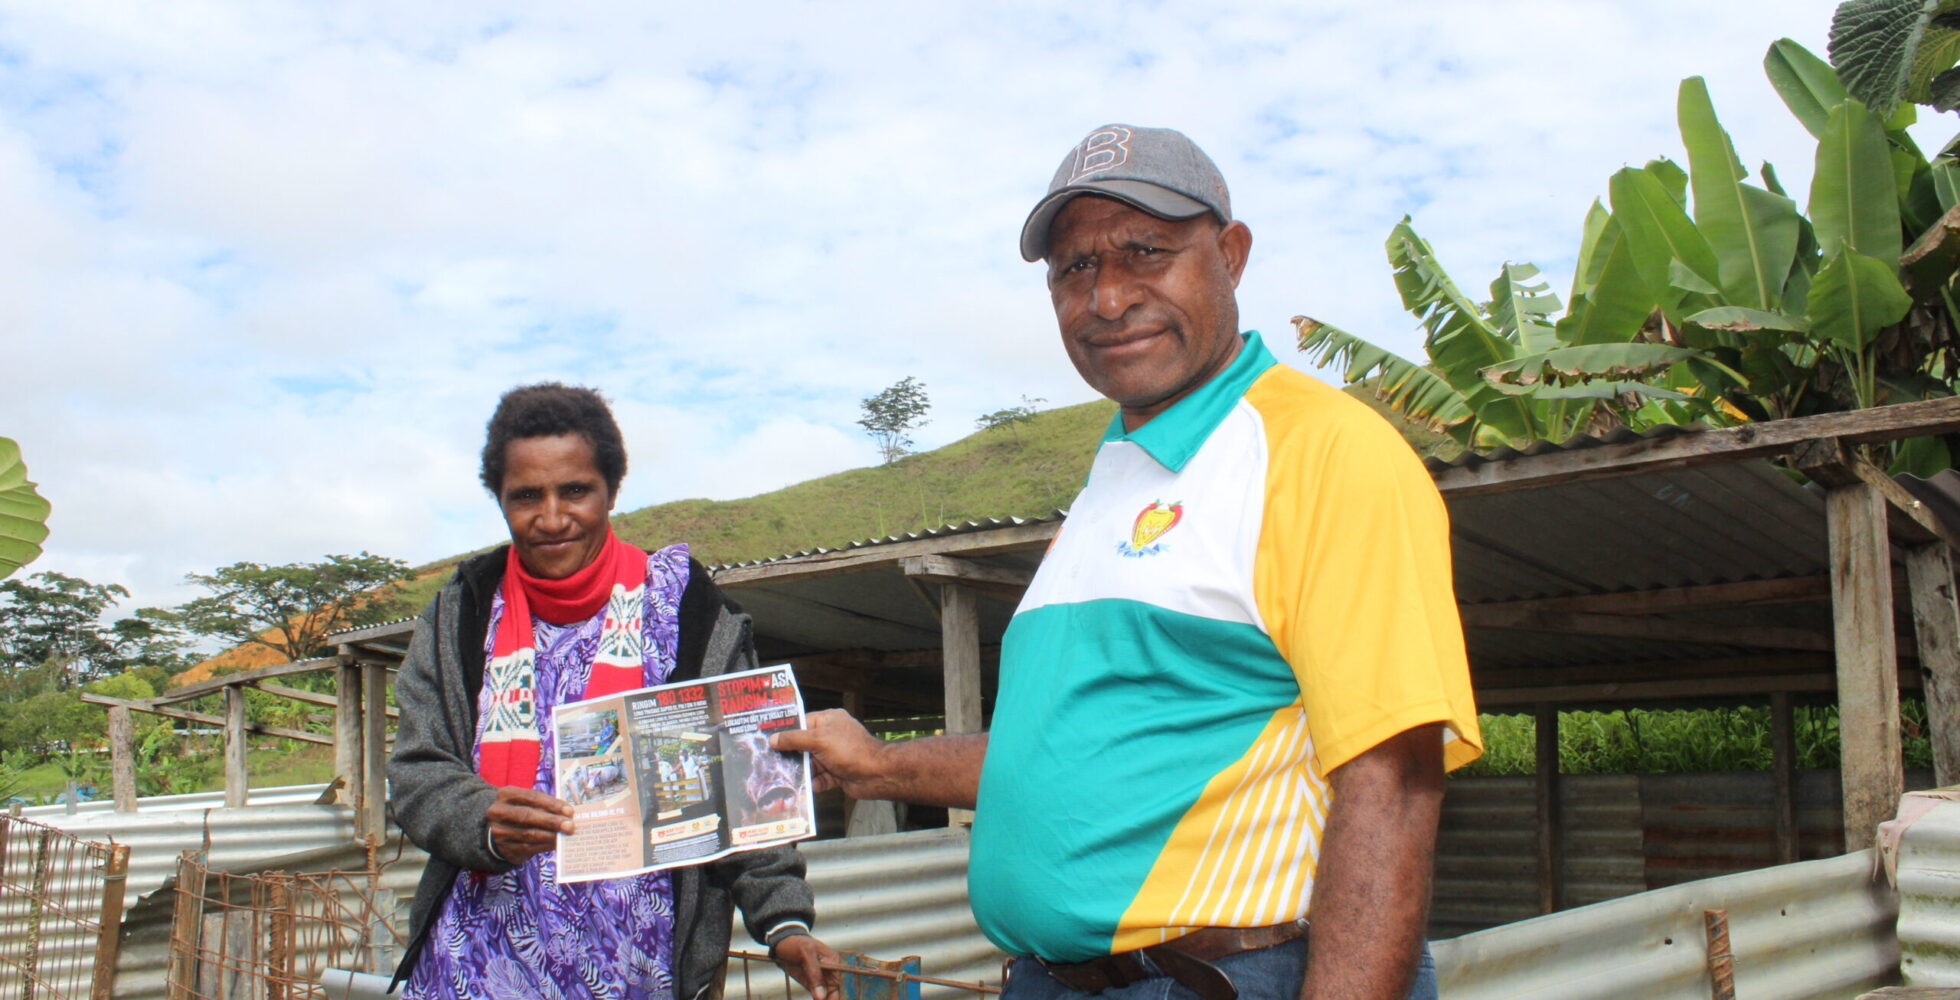 PREVENTING GENDER-BASED VIOLENCE, SAVING THE ‘PIGGY BANK’While battling the COVID-19 Pandemic, a new animal killing disease also emerged in Papua New Guinea – African Swine Fever (ASF). Like other pig farmers in the Upper Highlands, Grace Mark in Jiwaka Province was at risk of losing her livelihood – and more.